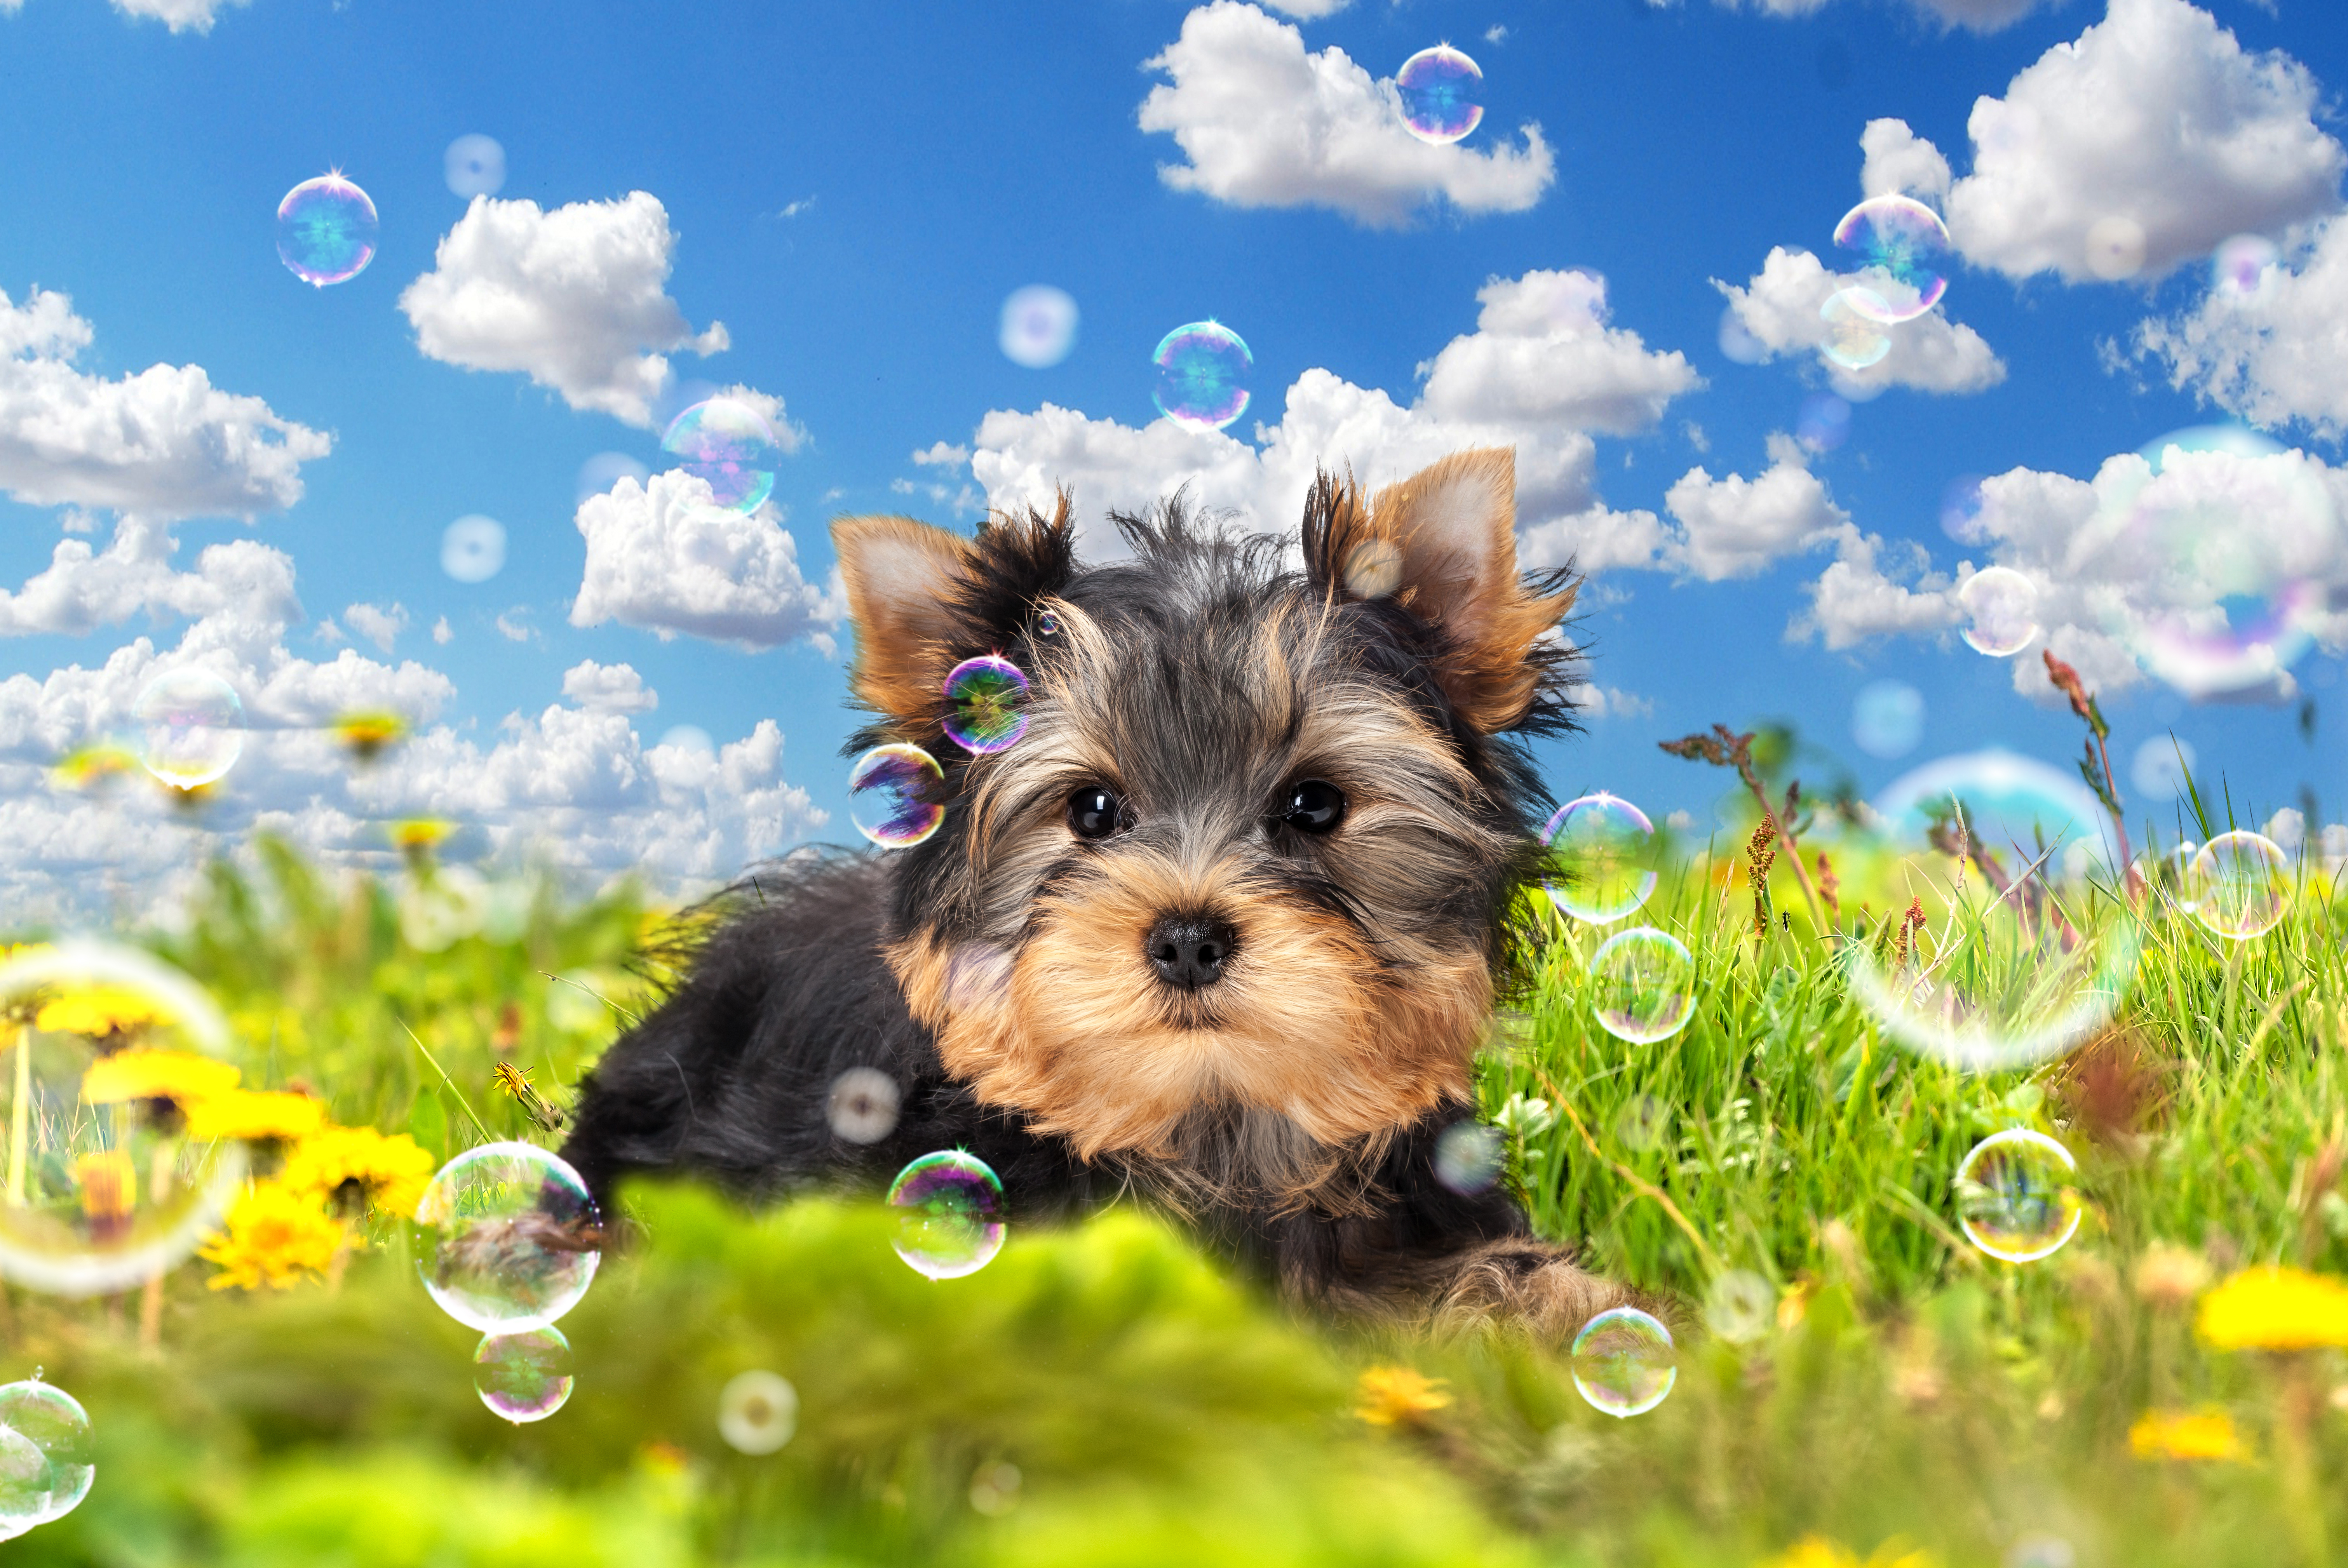 March 23 Special Events - Puppy day. Image of a Terrier in a field of grass with a beautiful blue sky in the background with clouds. 